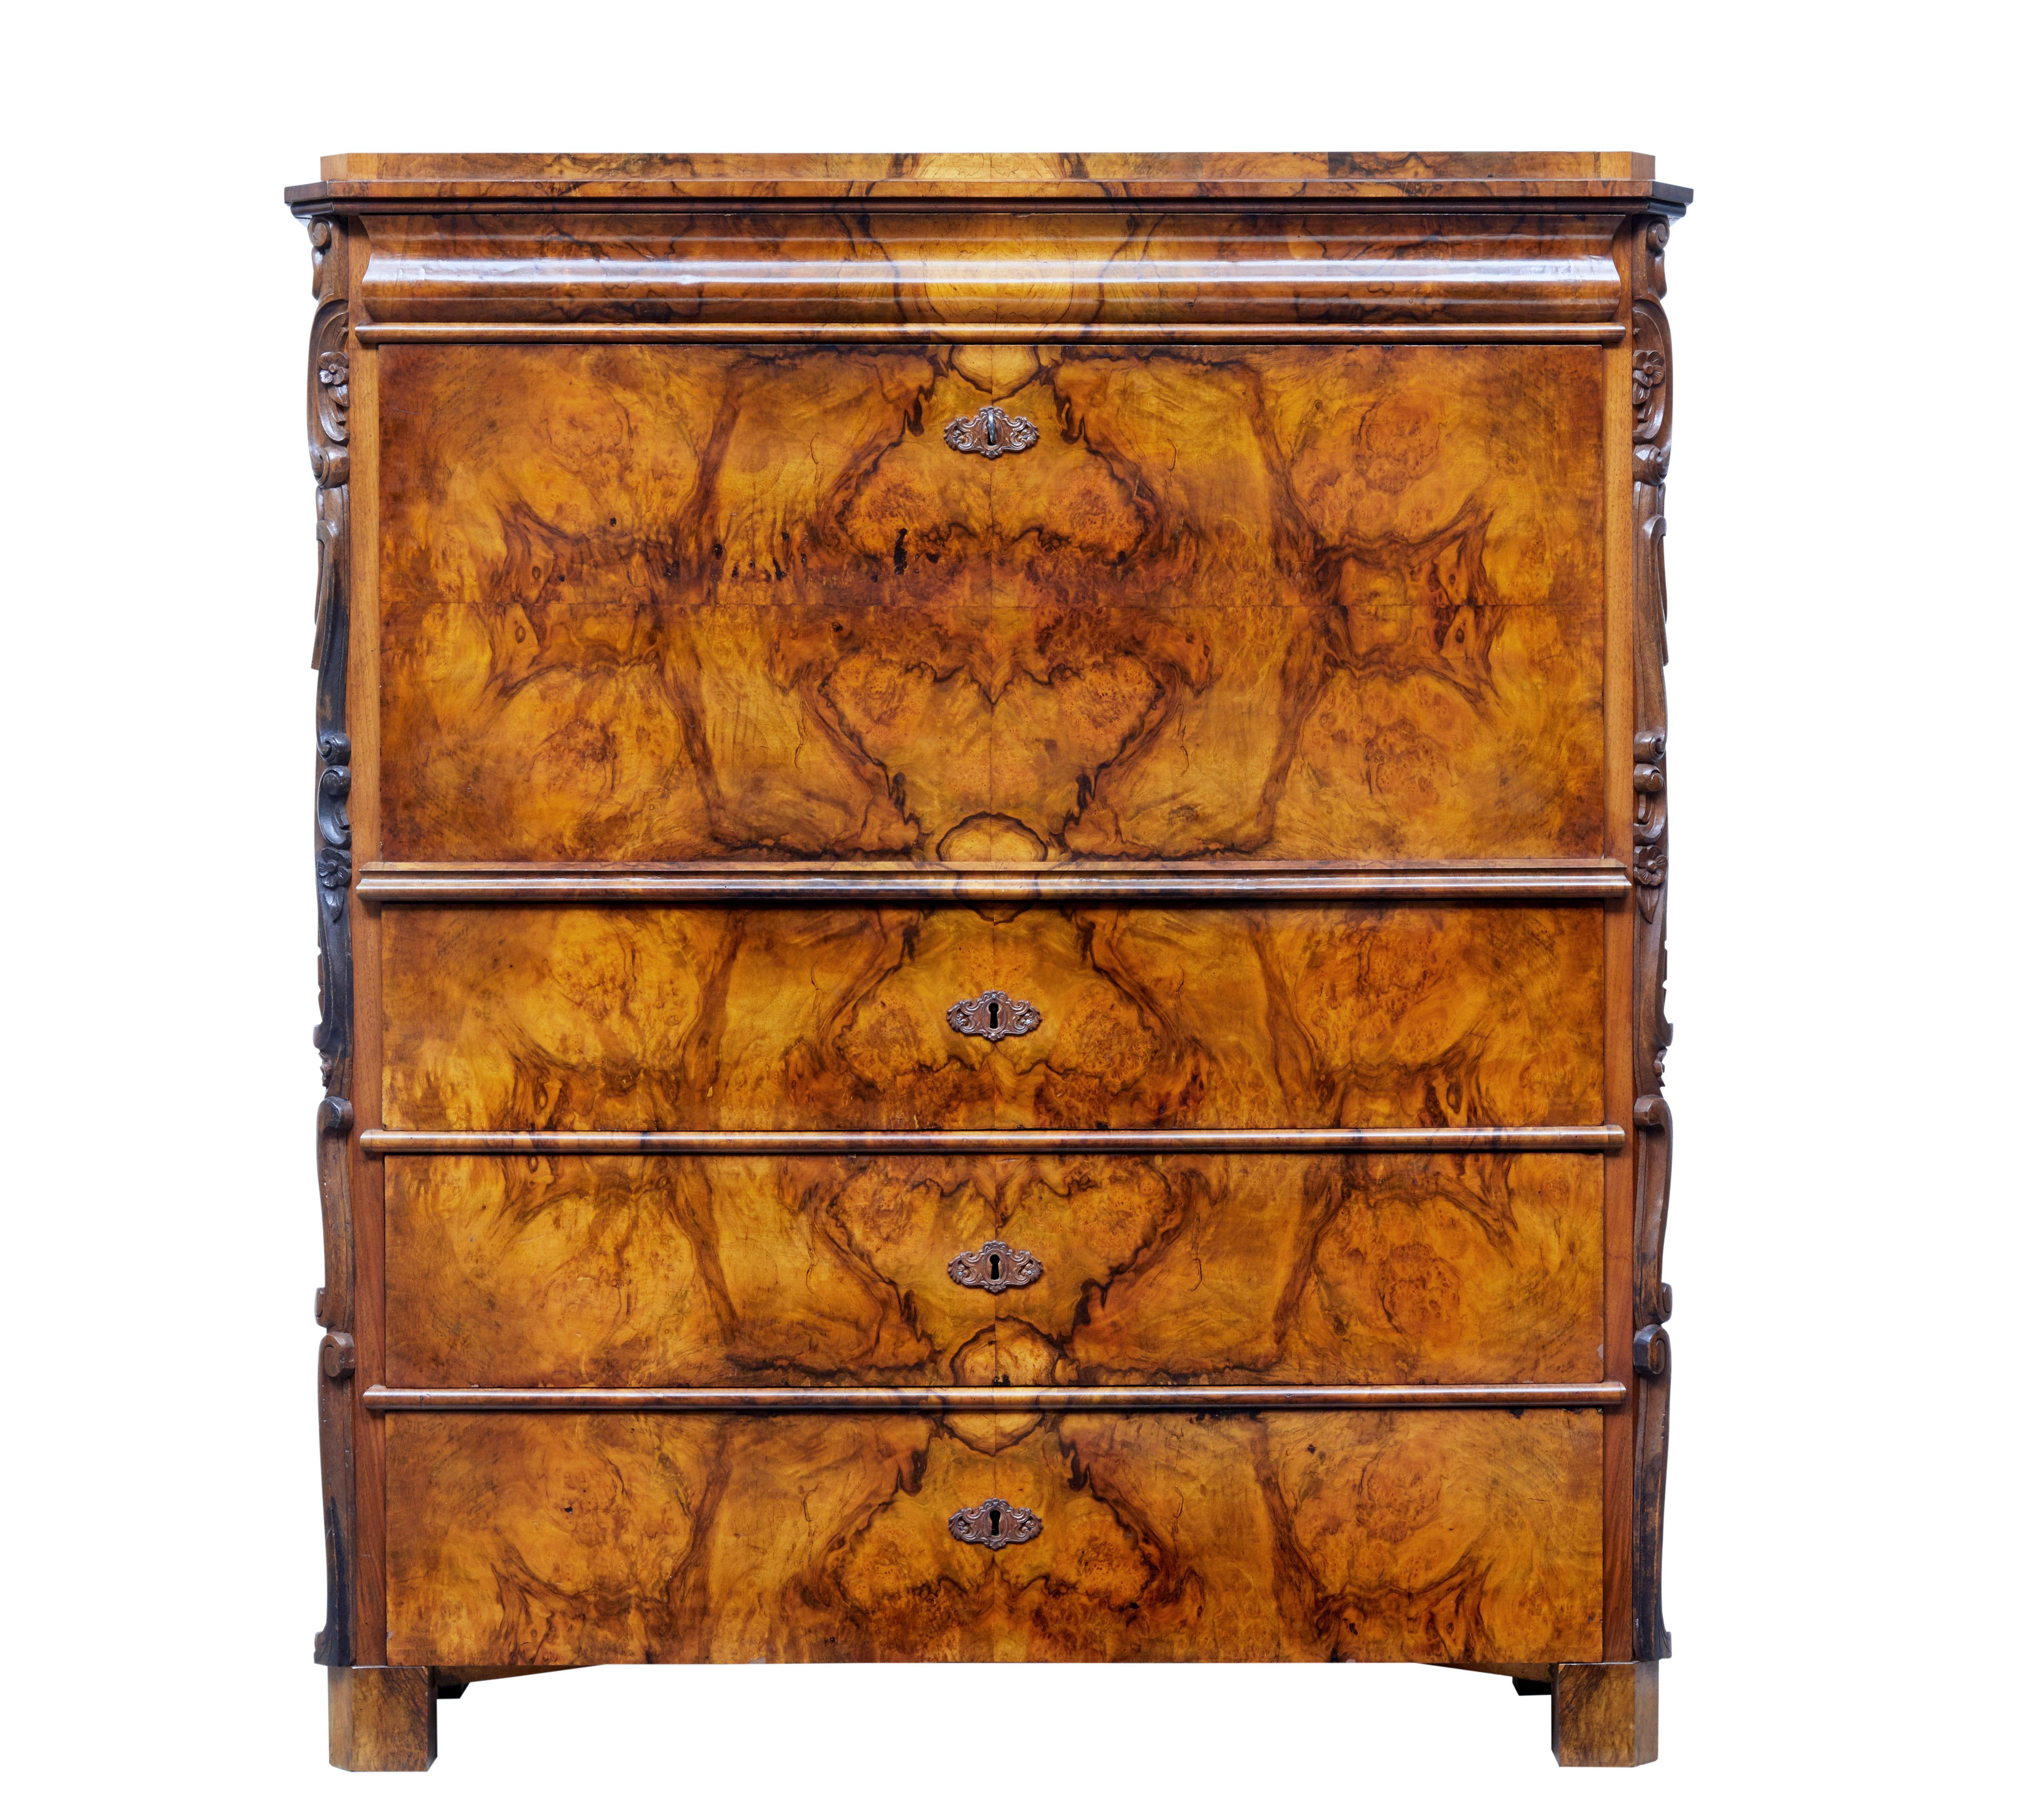 Fine quality Scandinavian burr walnut escritoire, circa 1870.

Stunning example made with matching burr walnut veneers to the drawer and fall fronts. Burr top surface and canted corners with applied swag carvings. Concealed drawer below the top